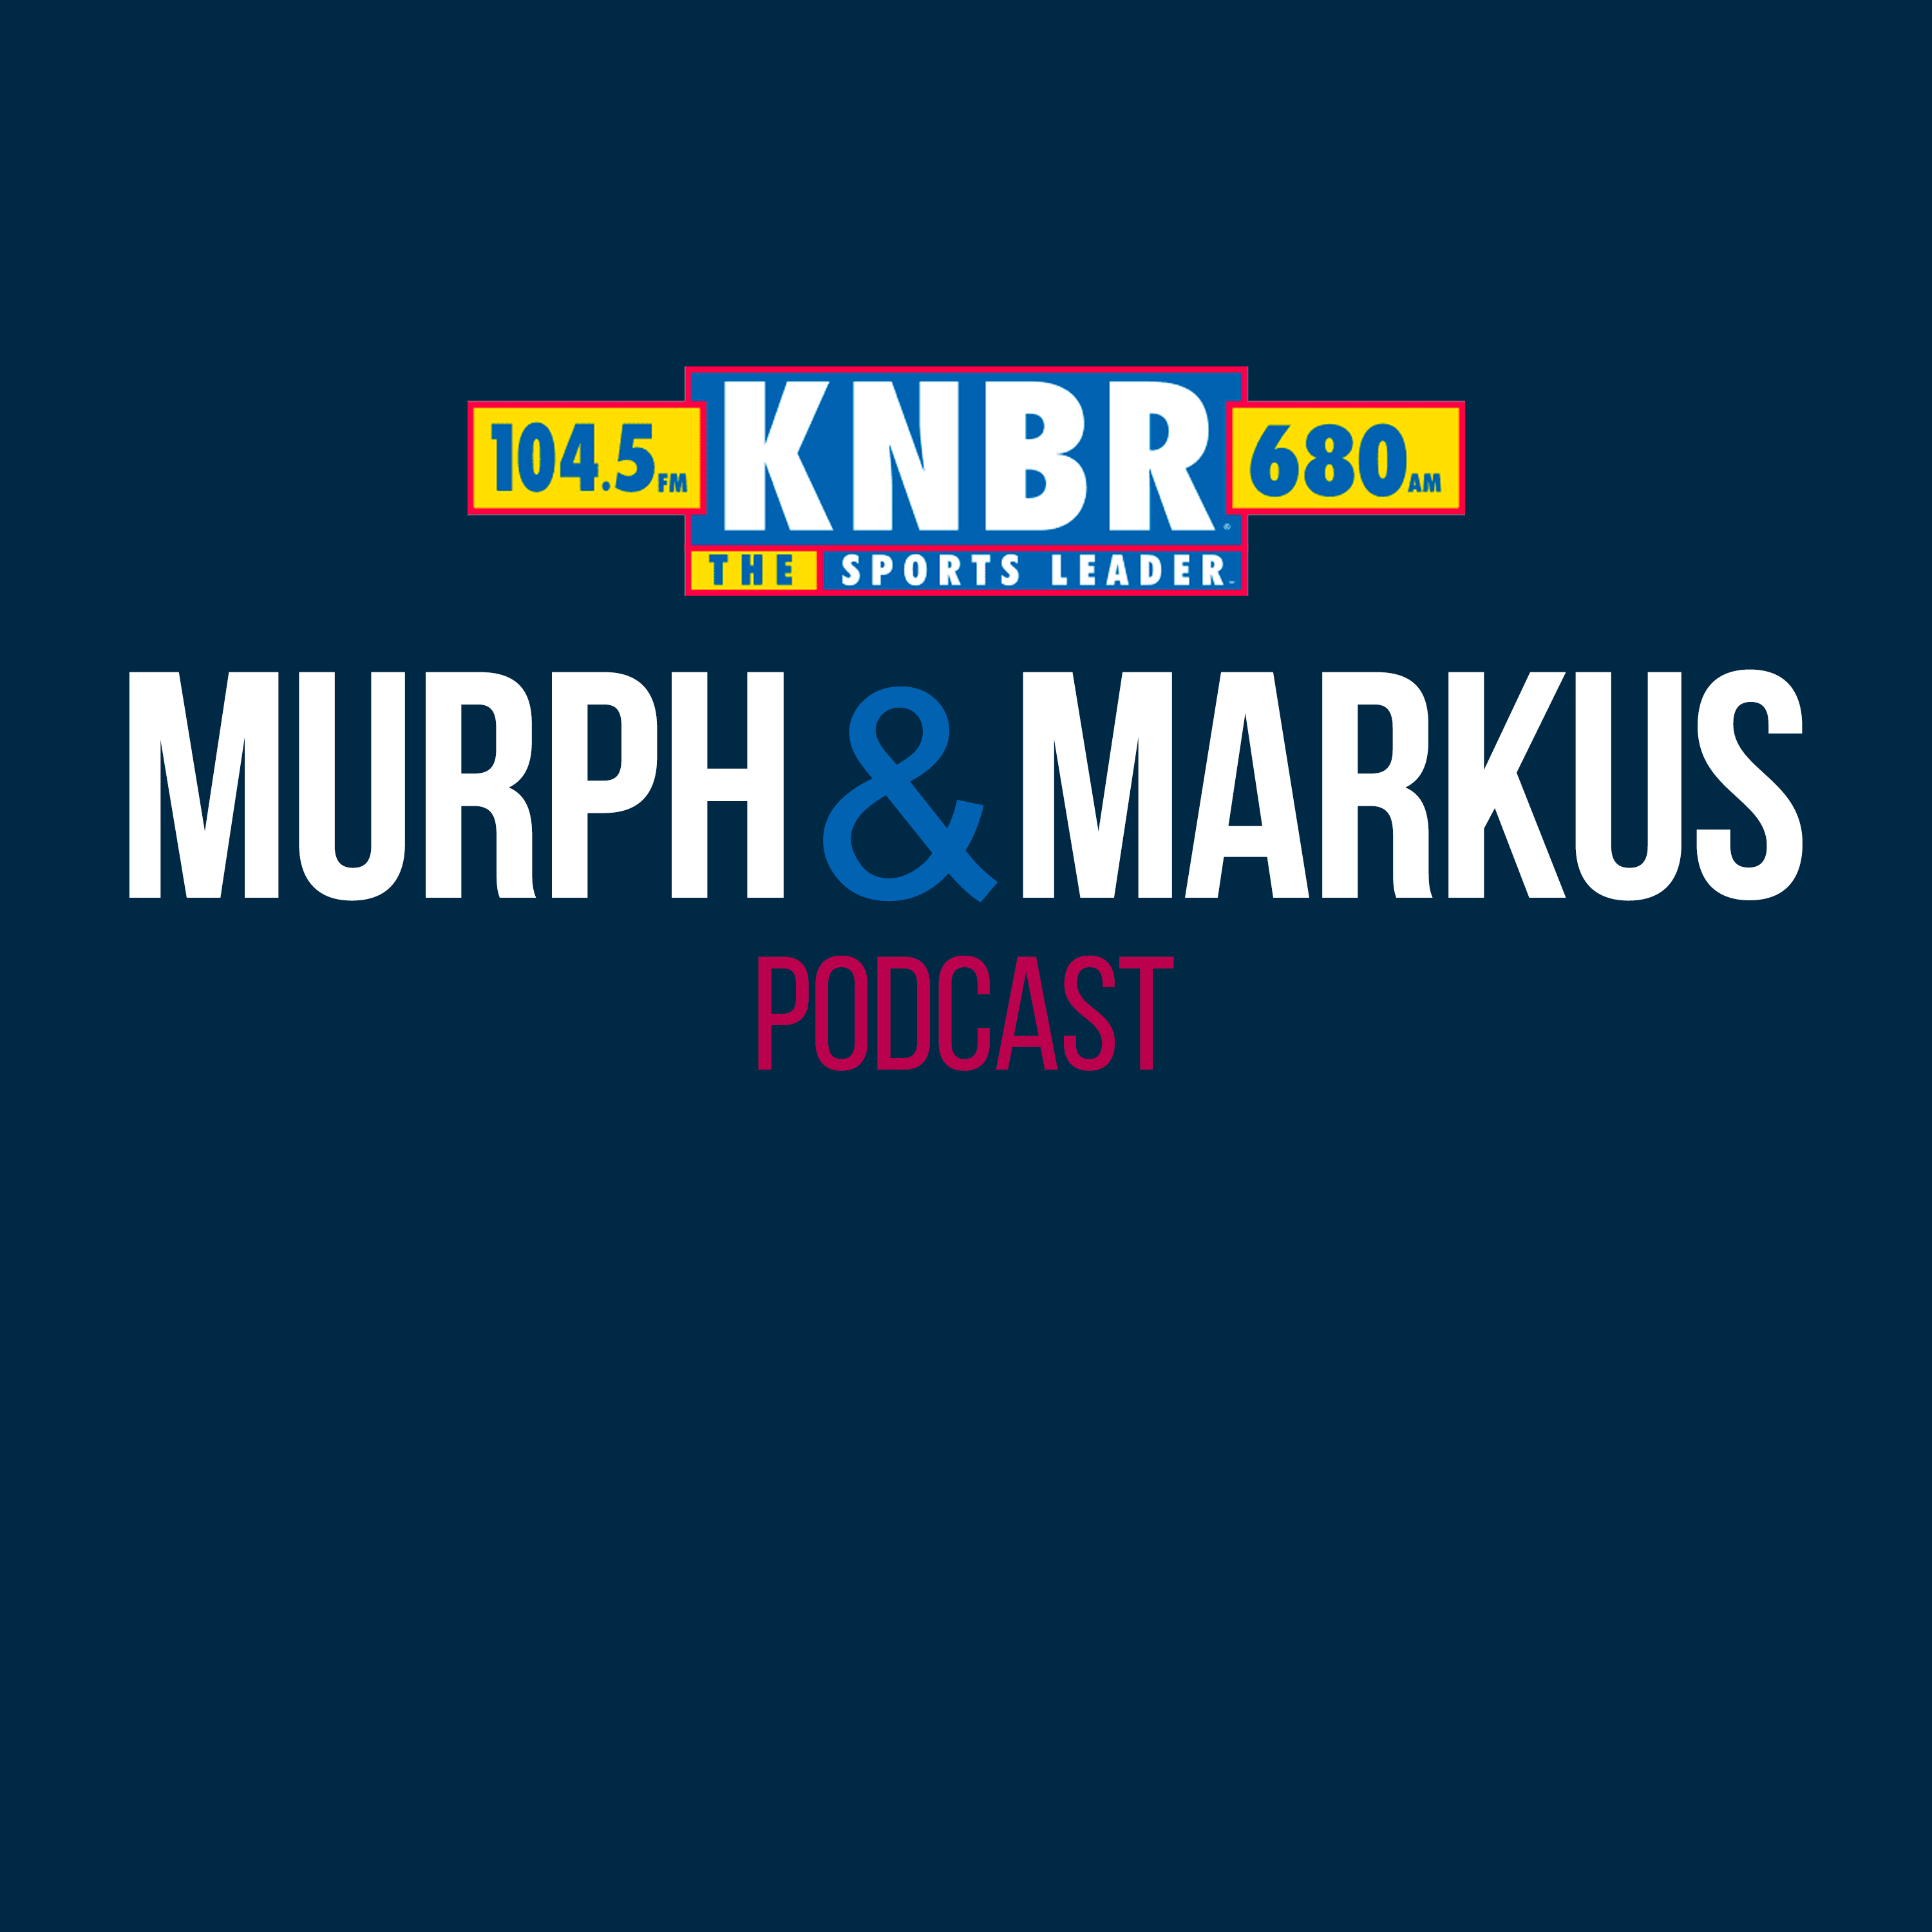 4-19 Mike Krukow joins Murph and Markus to discuss the Giants first win vs the D'Backs and tells a classic story about his old teammate, Bob Brenly